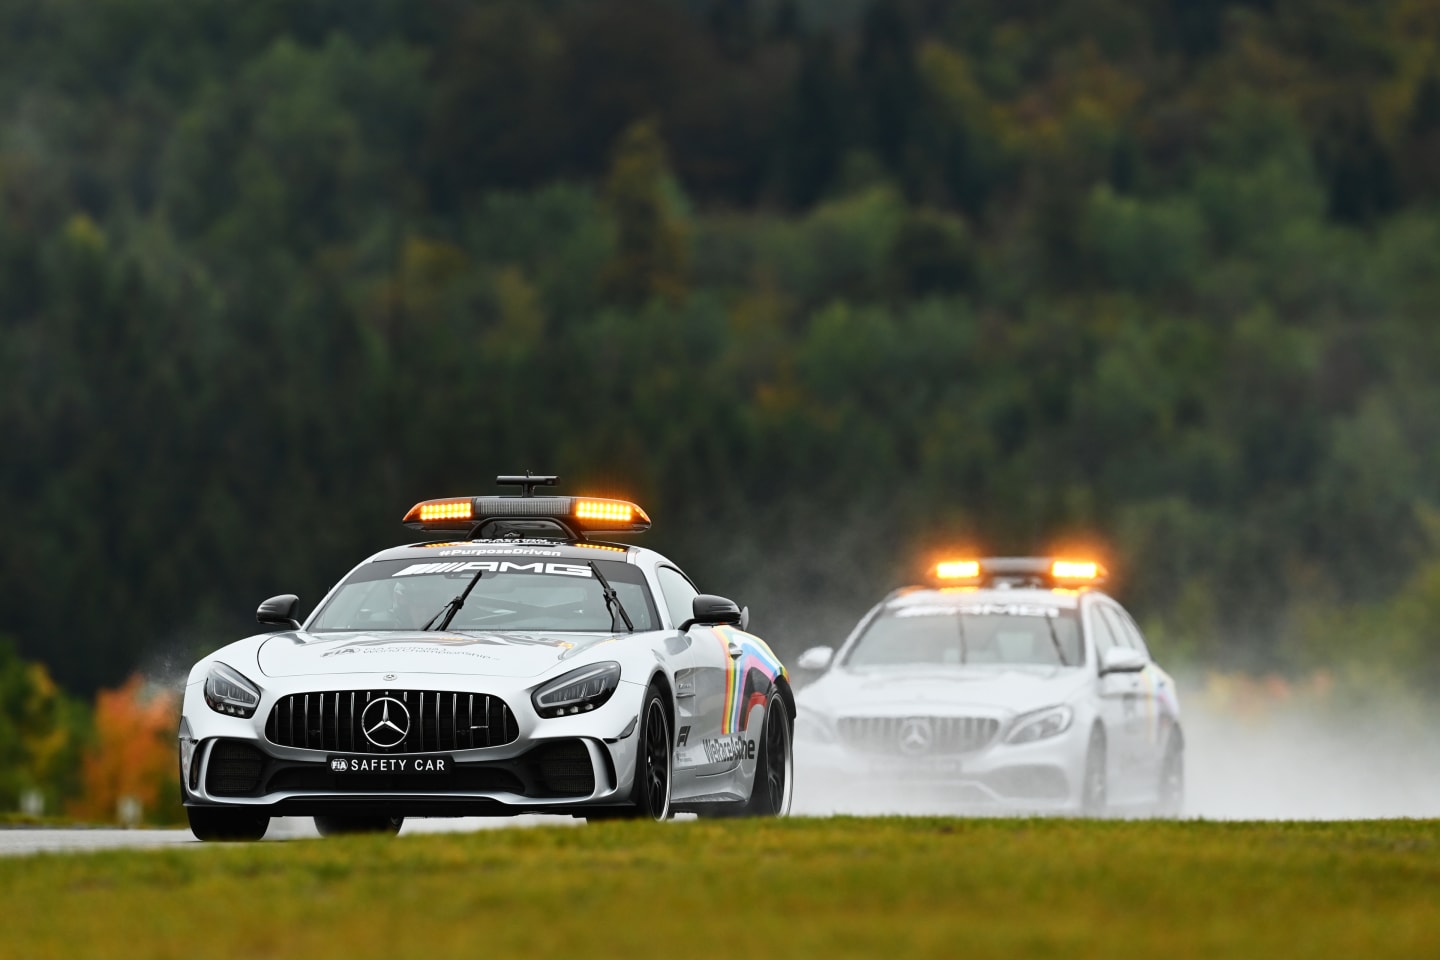 NUERBURG, GERMANY - OCTOBER 09: The FIA Safety Car and FIA Medical Car do a lap on track before